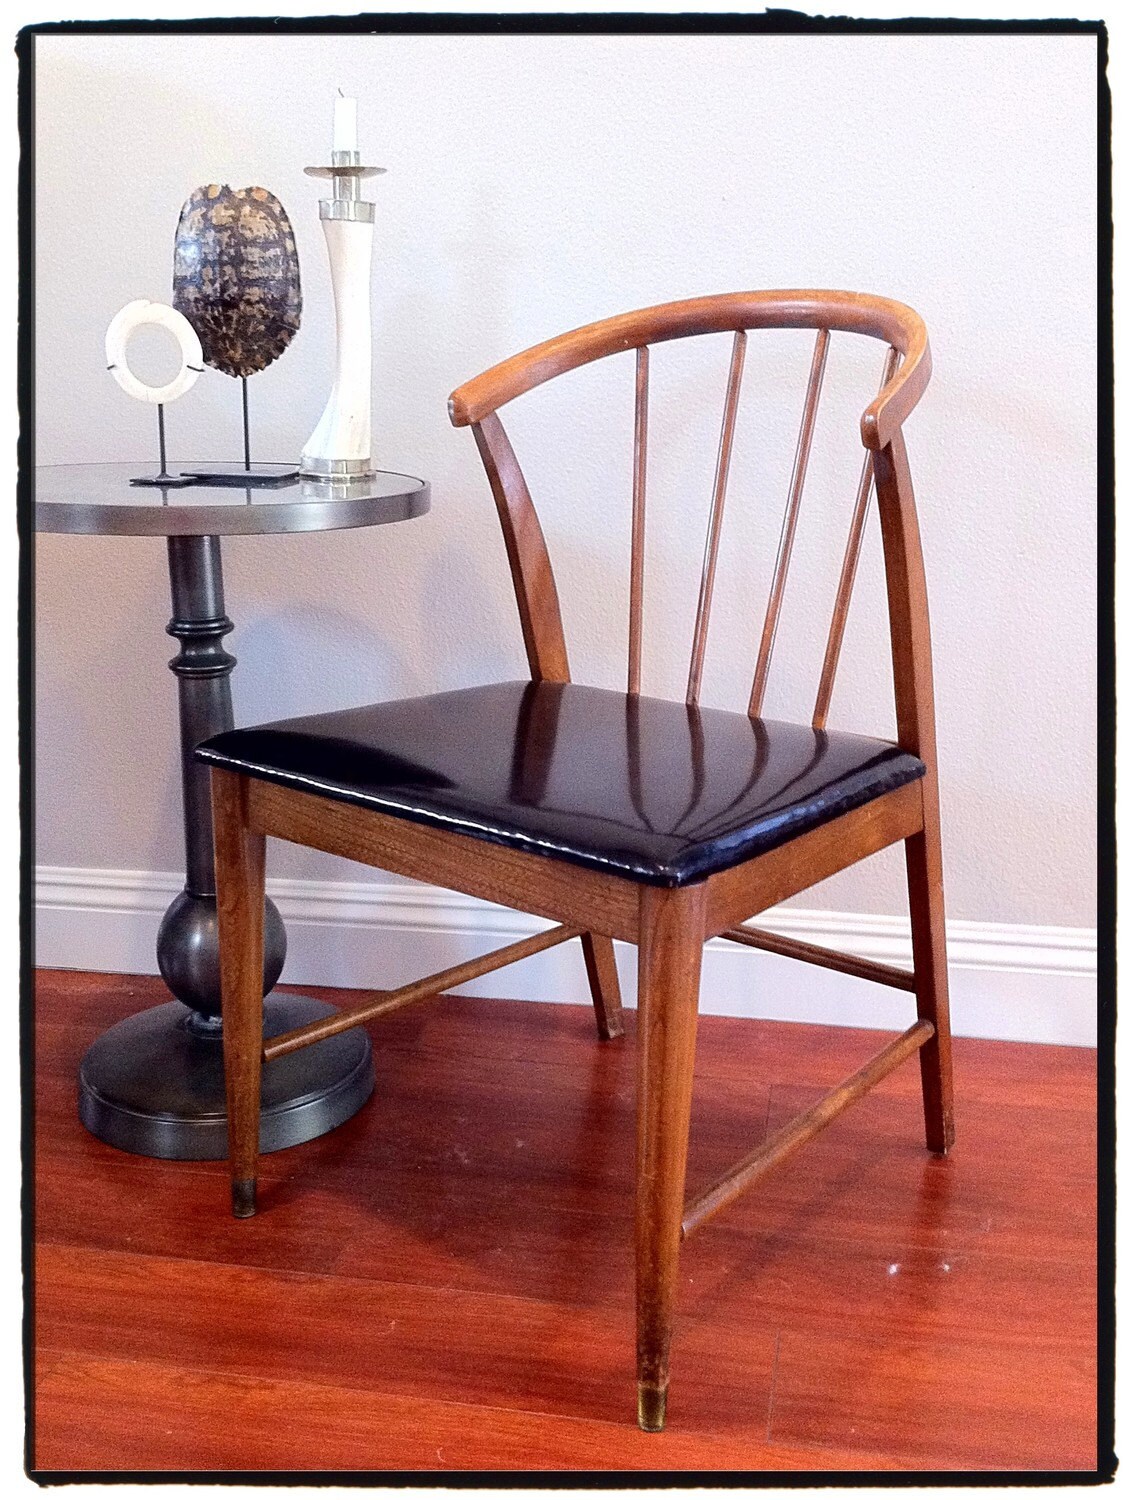 Vintage Wood Chair with Curved Back Detail by WESTonCOLE on Etsy